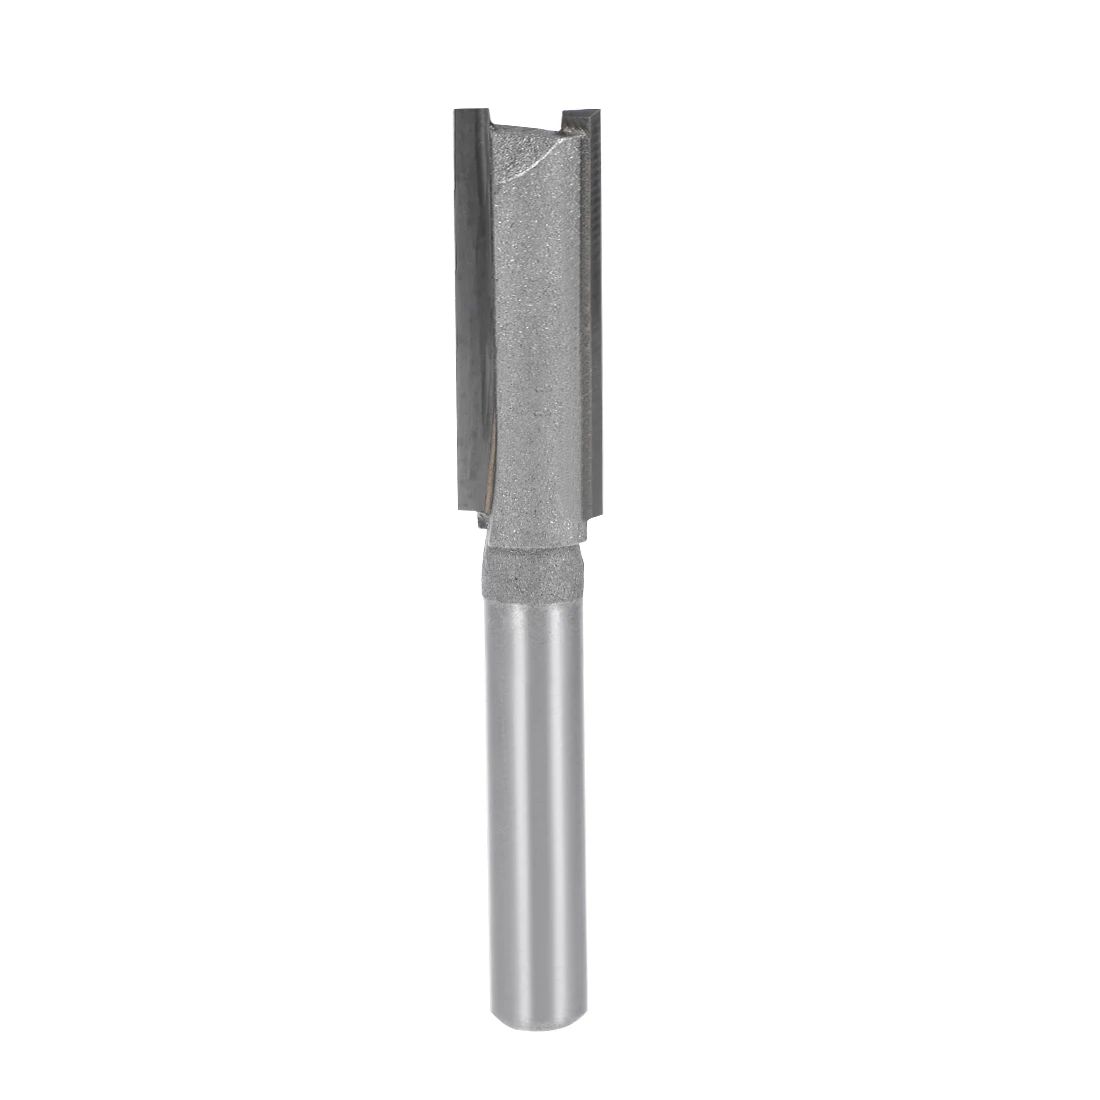 

uxcell Router Bit 1/4" Shank 3/8" Cutting Dia 2 Straight Flutes Carbide for Woodworking Carpentry Milling Cutter Tool